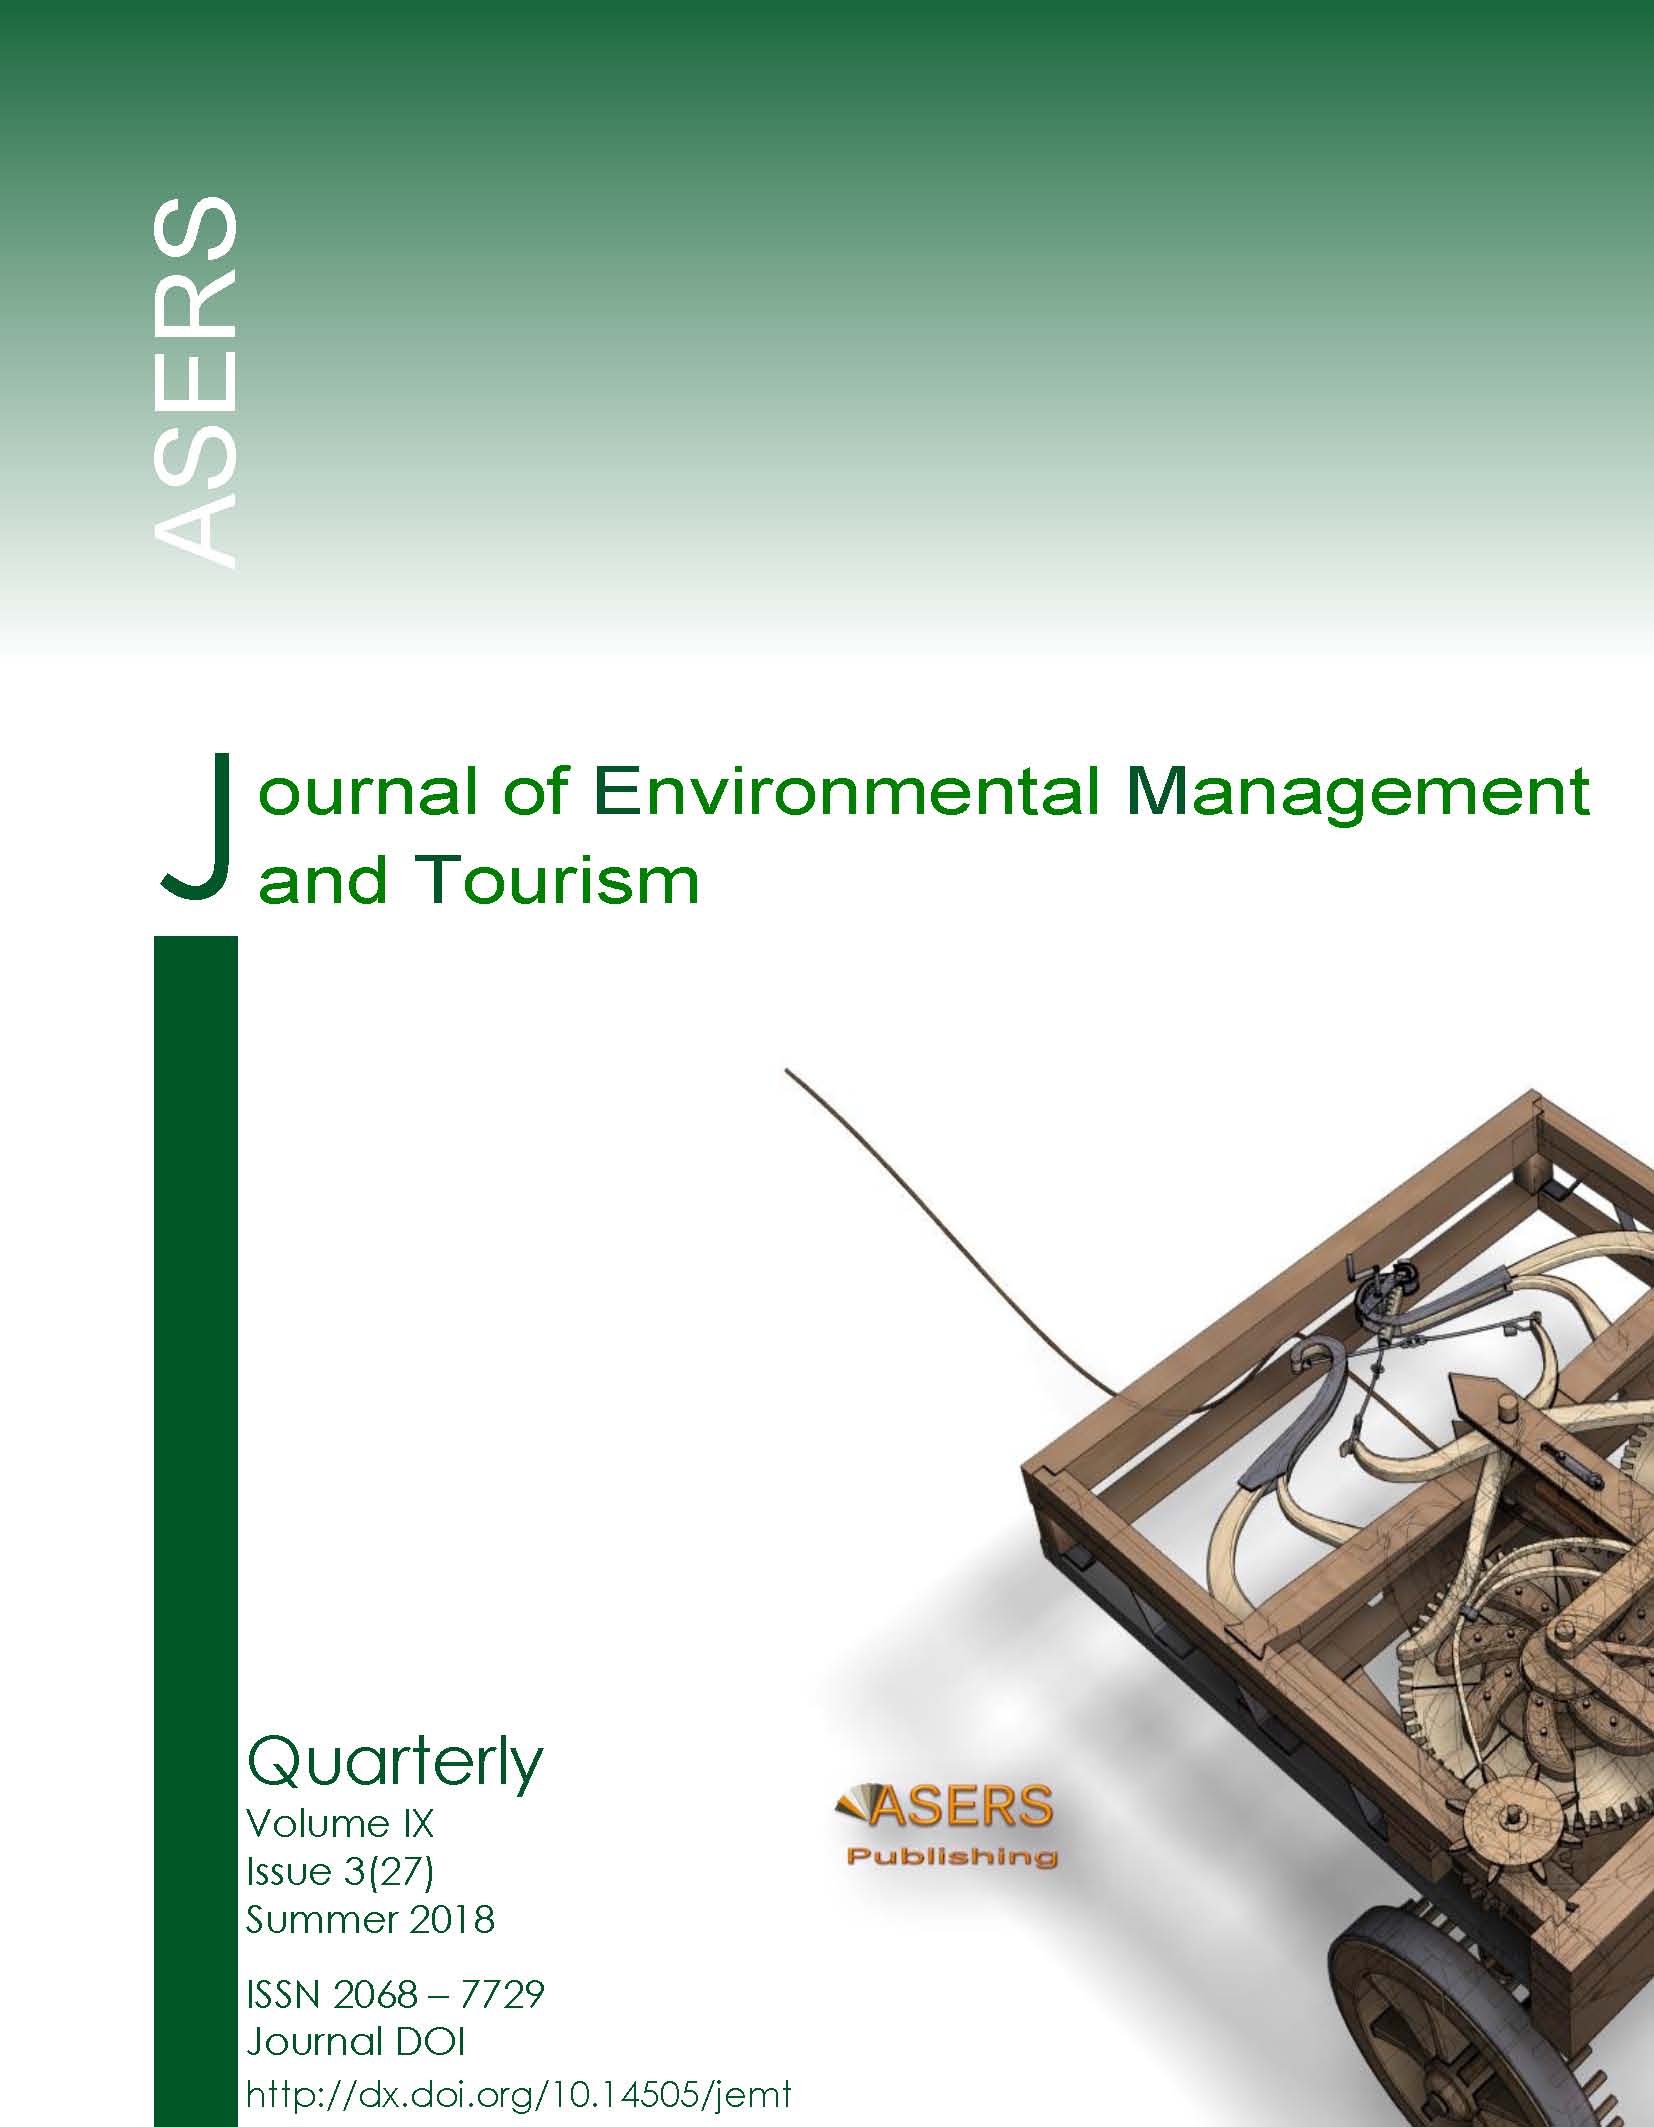 International Experience in the Development of Green Economy Cover Image